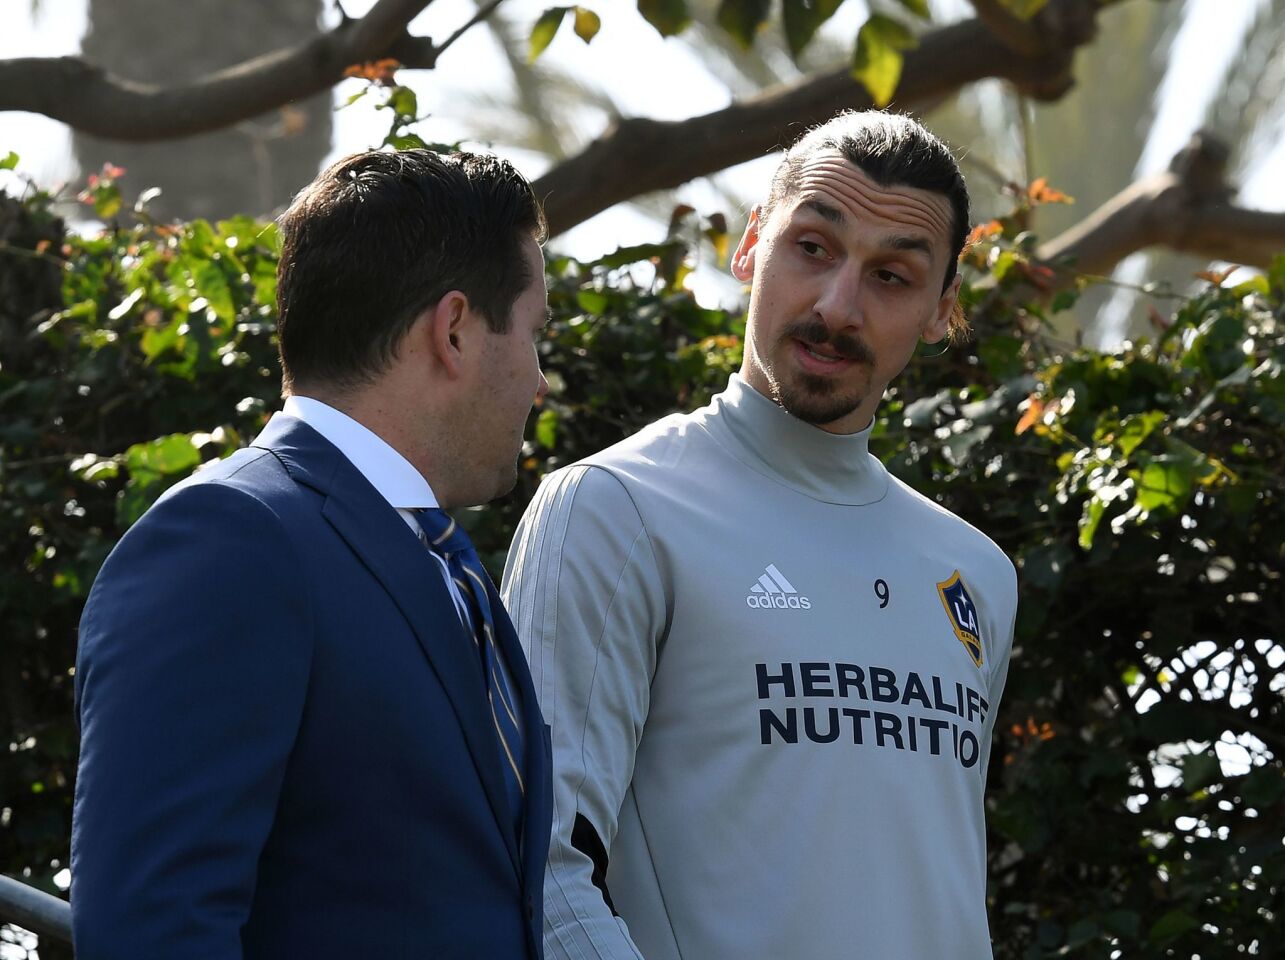 Football star Zlatan Ibrahimovic (R) arrives for his first training session at his new club LA Galaxy in Los Angeles, California, on March 30, 2018. The 36-year-old Swedish striker's move to MLS from Manchester United was confirmed last week, with Ibrahimovic swiftly vowing to reignite the Galaxy's fortunes after they finished bottom of the league last season. / AFP PHOTO / Mark RalstonMARK RALSTON/AFP/Getty Images ** OUTS - ELSENT, FPG, CM - OUTS * NM, PH, VA if sourced by CT, LA or MoD **